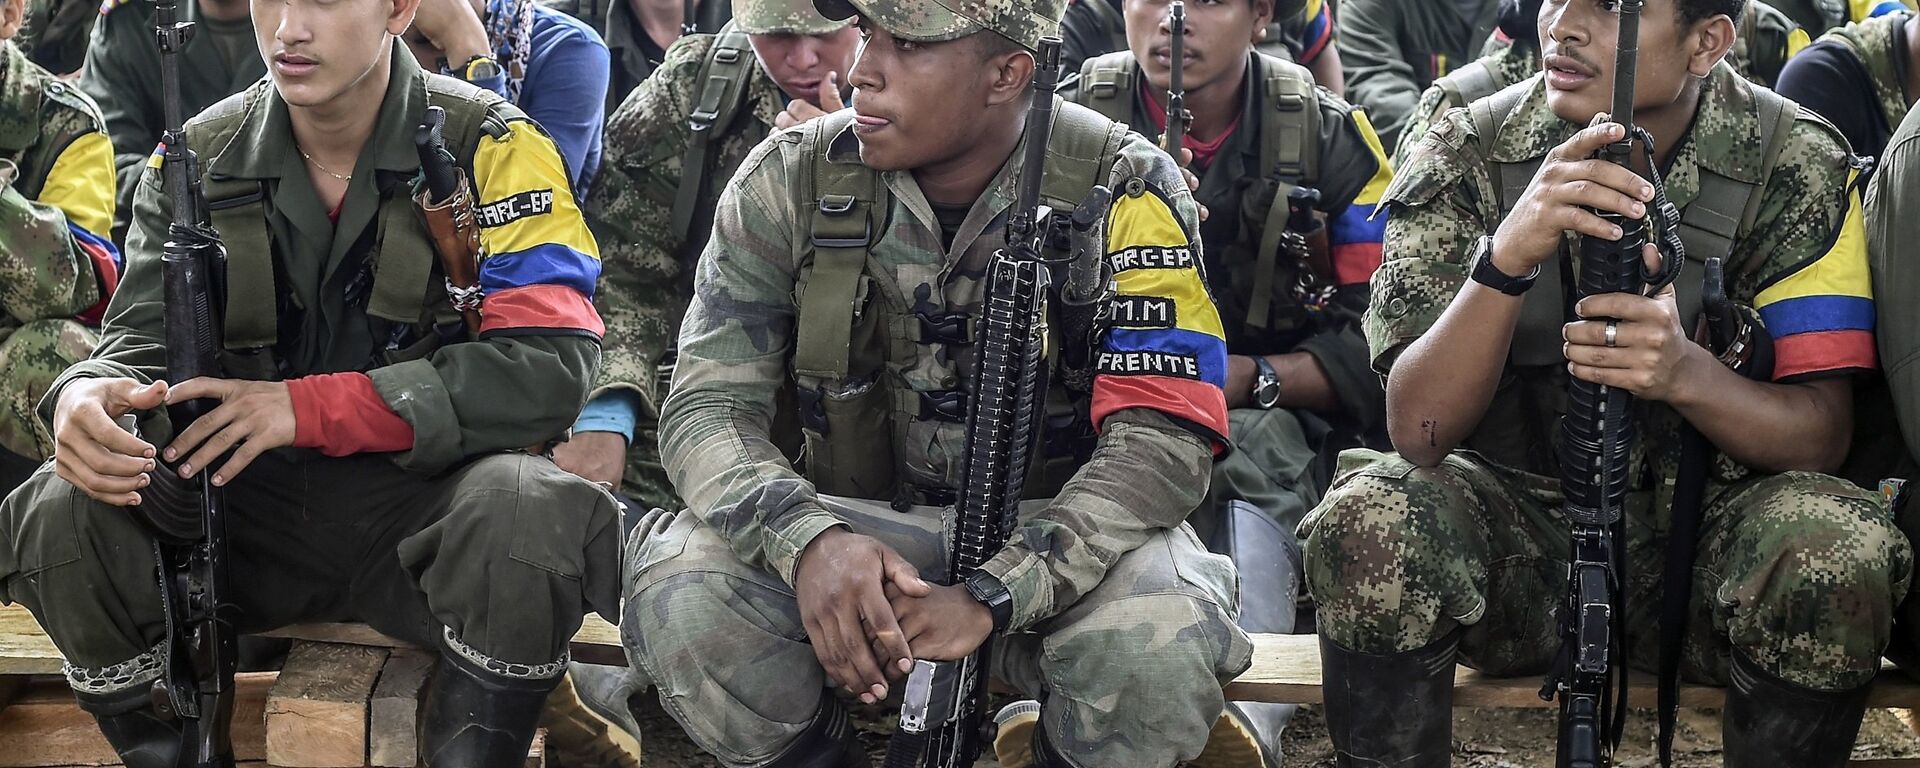 Revolutionary Armed Forces of Colombia (FARC) guerrillas listen during a class on the peace process between the Colombian government and their force, at a camp in the Colombian mountains on February 18, 2016. - Sputnik Mundo, 1920, 04.10.2021